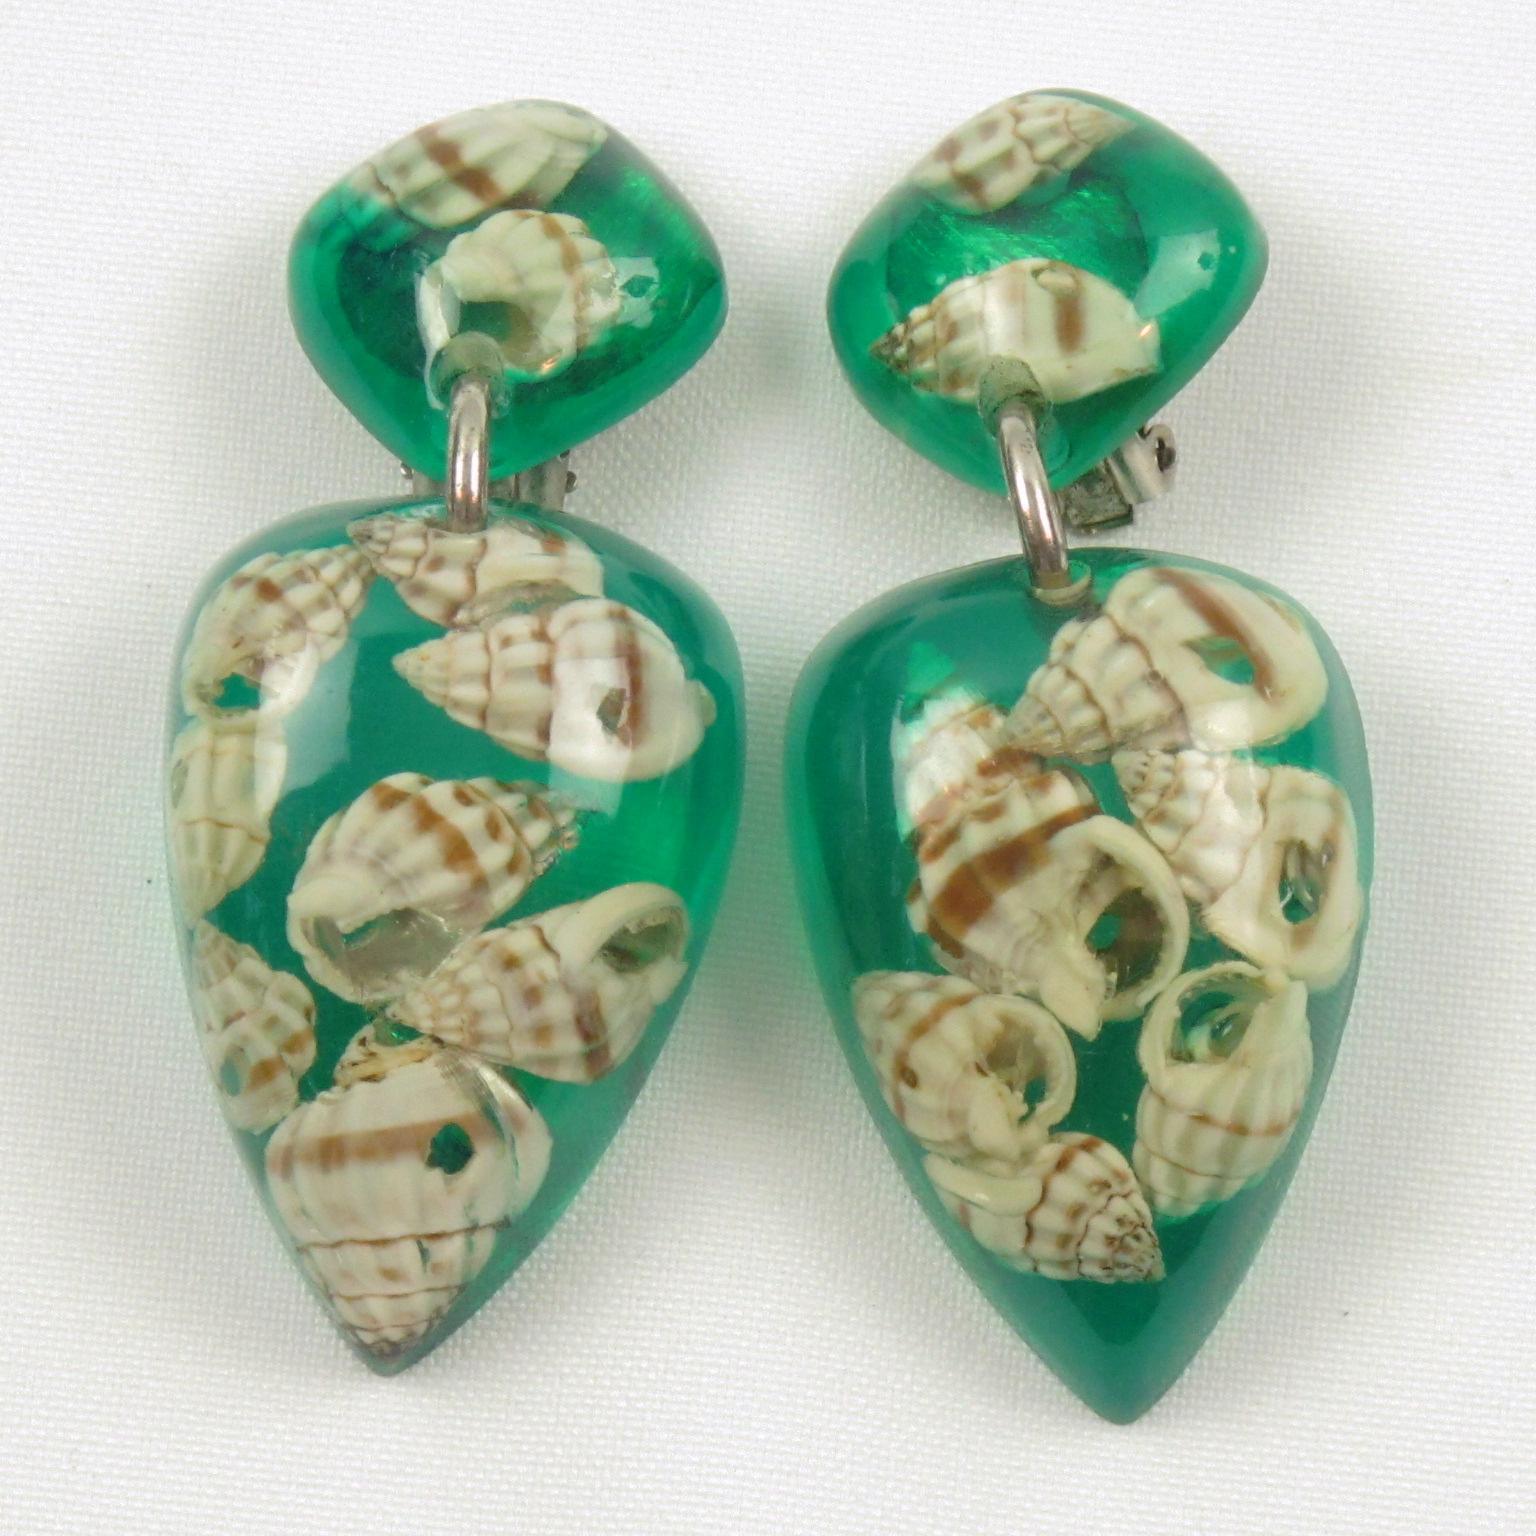 Modernist French Oversized Green Lucite Clip on Earrings with SeaShell Inclusions